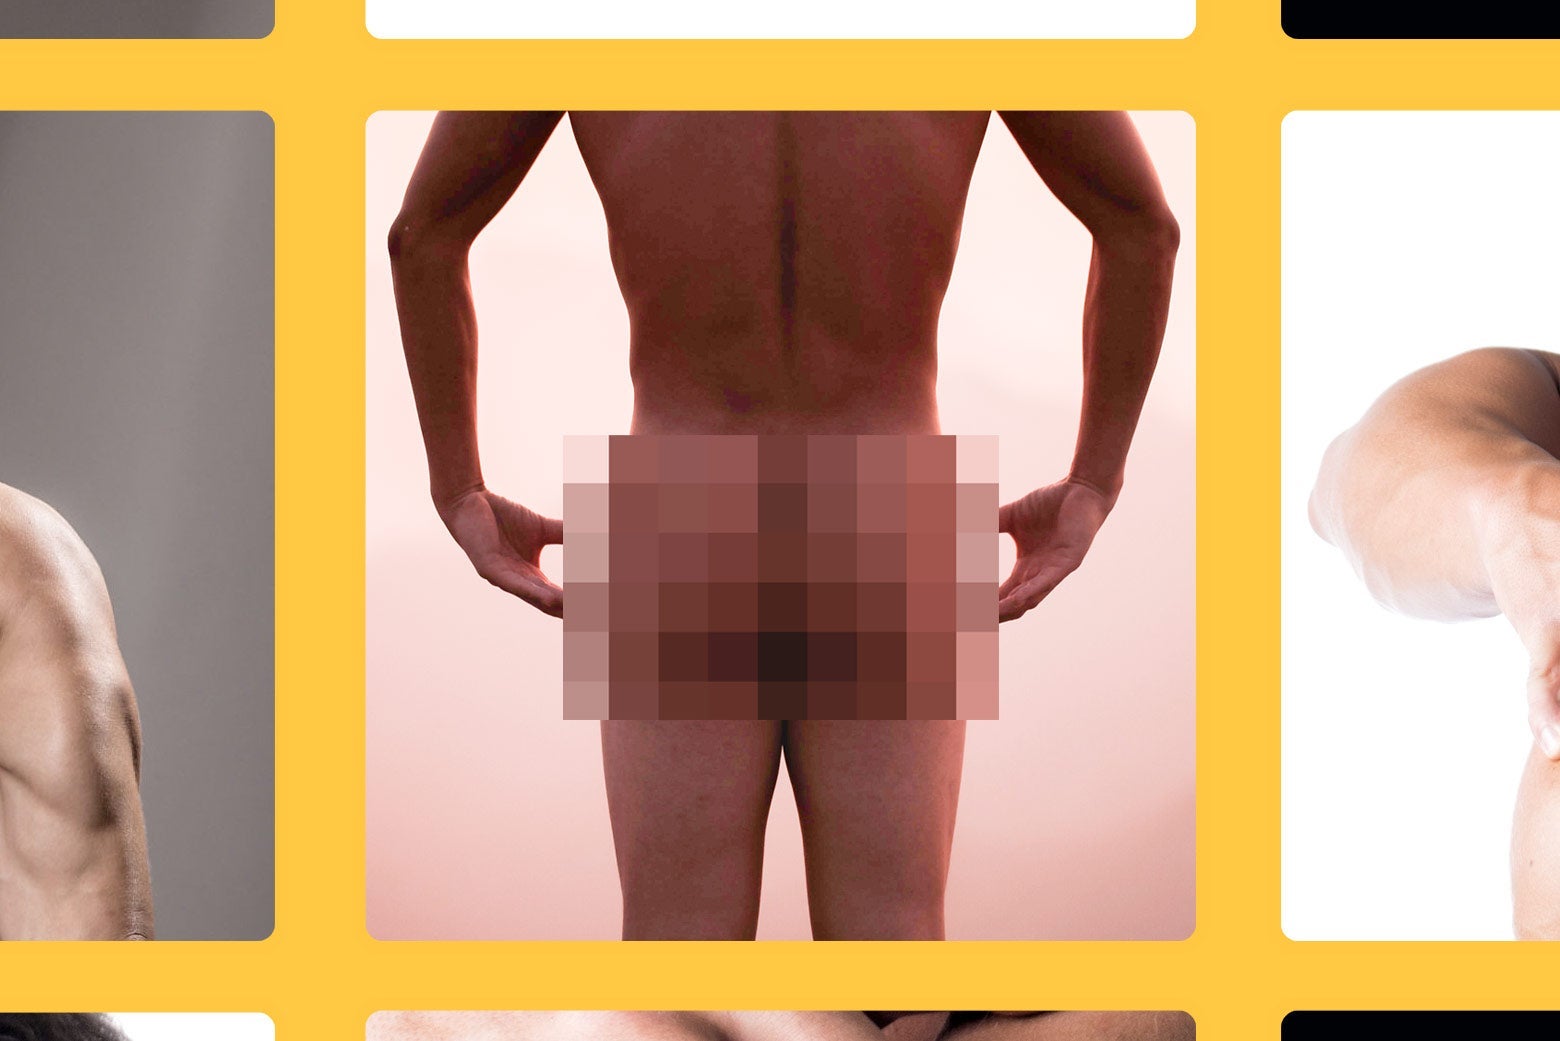 Grindr Whats behind the new rule thats surprising users? photo